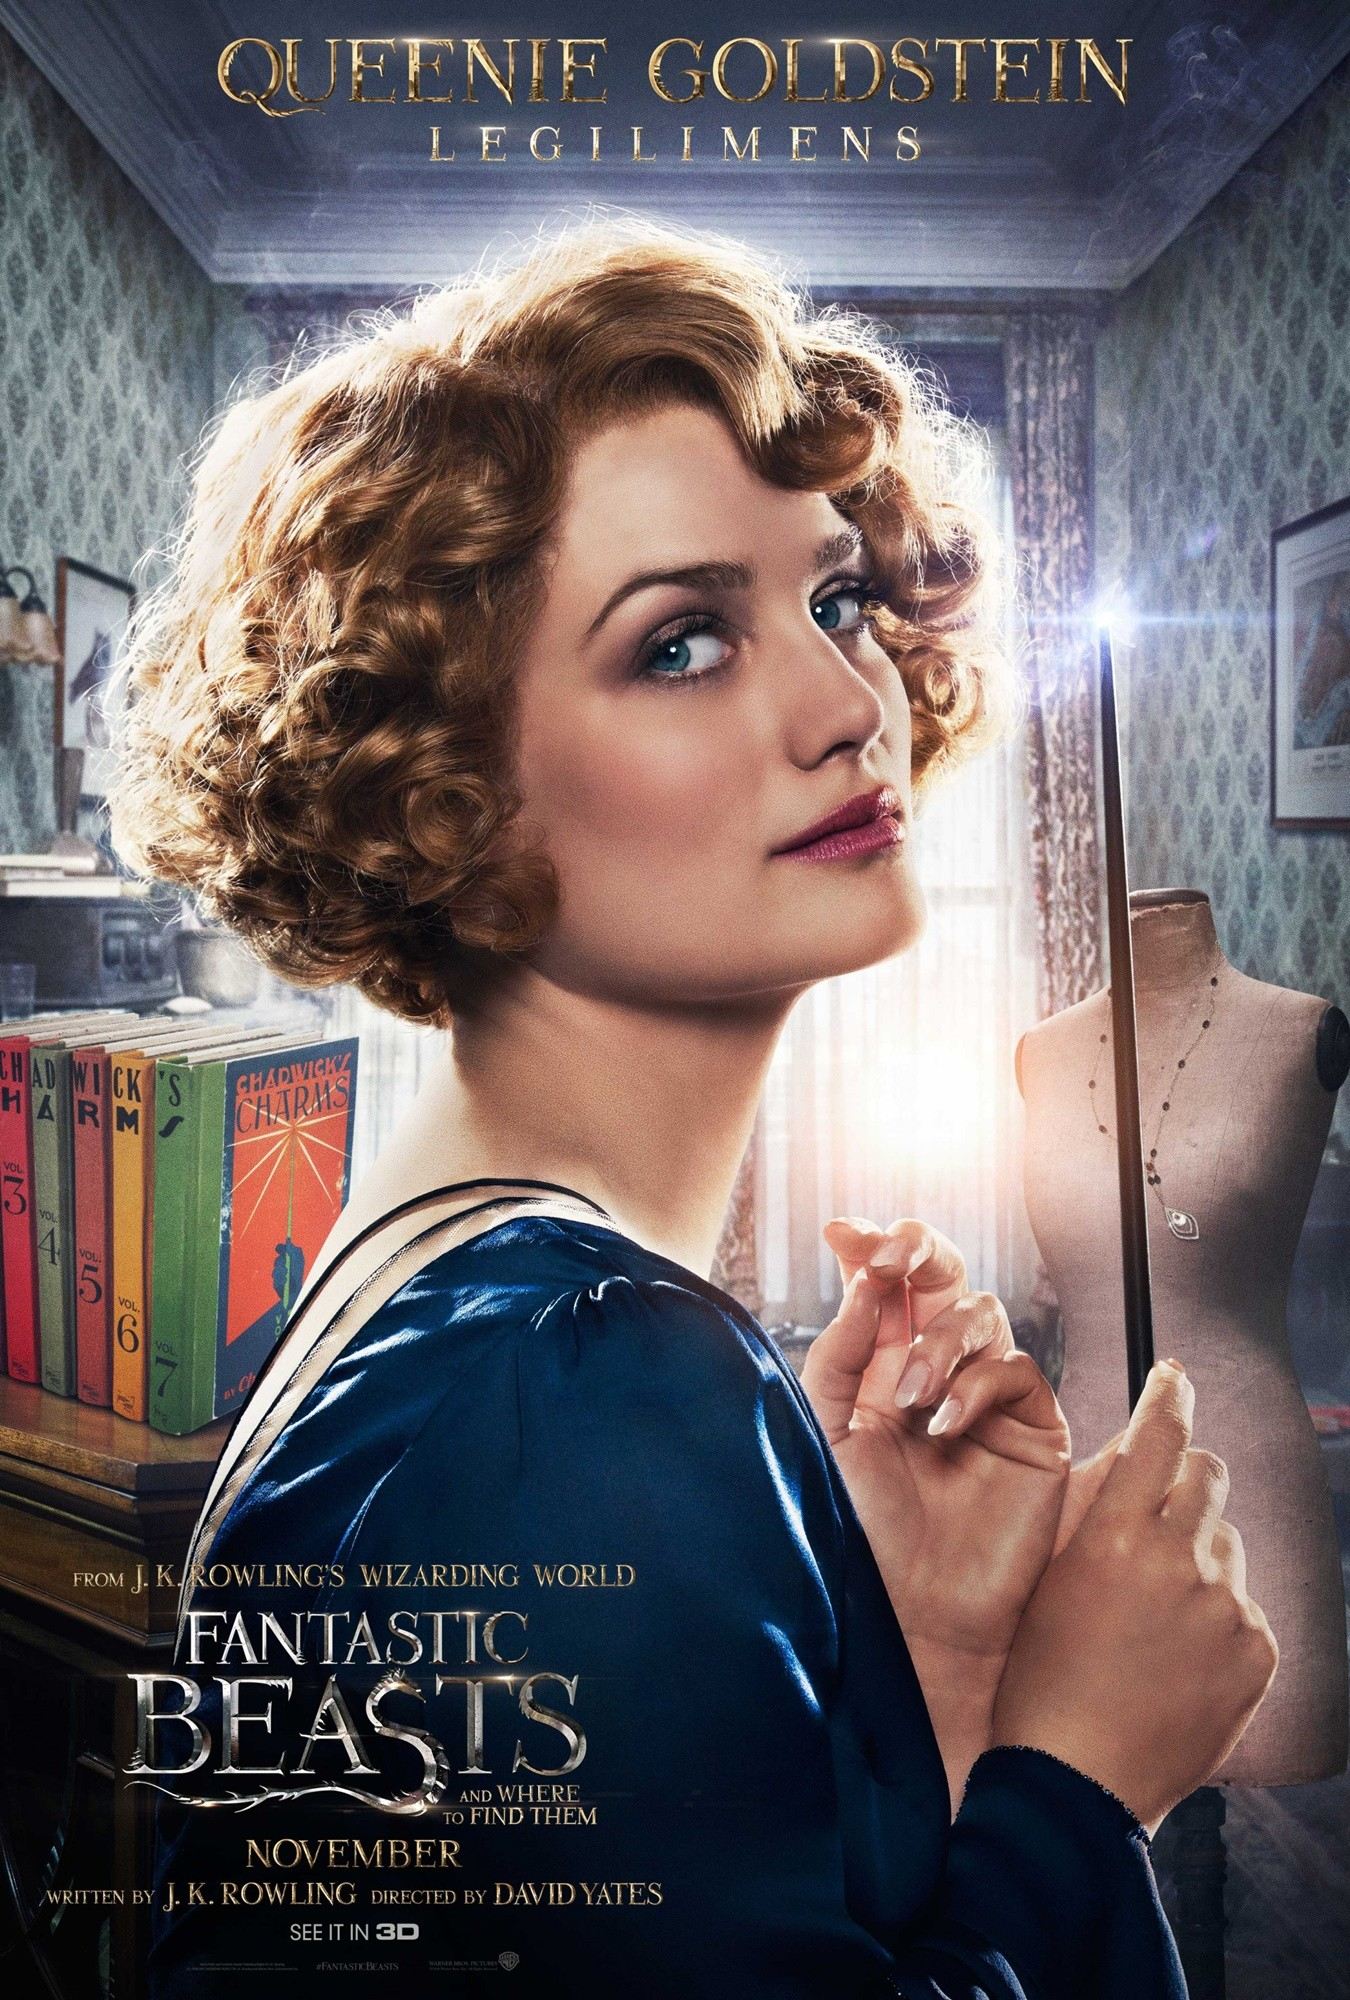 Fantastic Beasts and Where to Find Them for ipod download